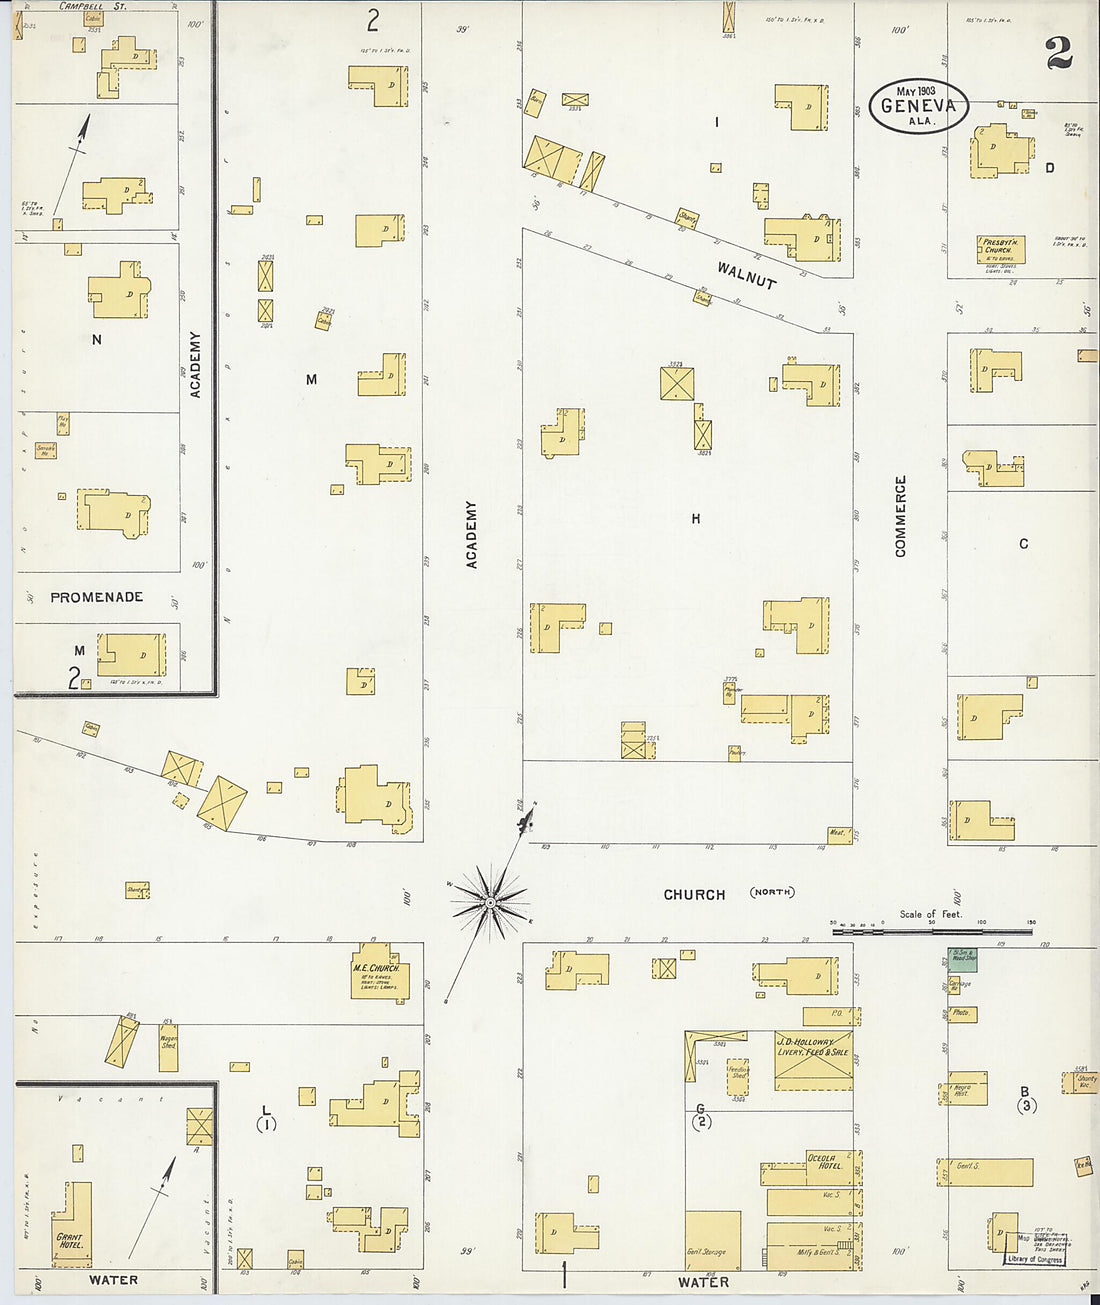 This old map of Geneva, Geneva County, Alabama was created by Sanborn Map Company in 1903